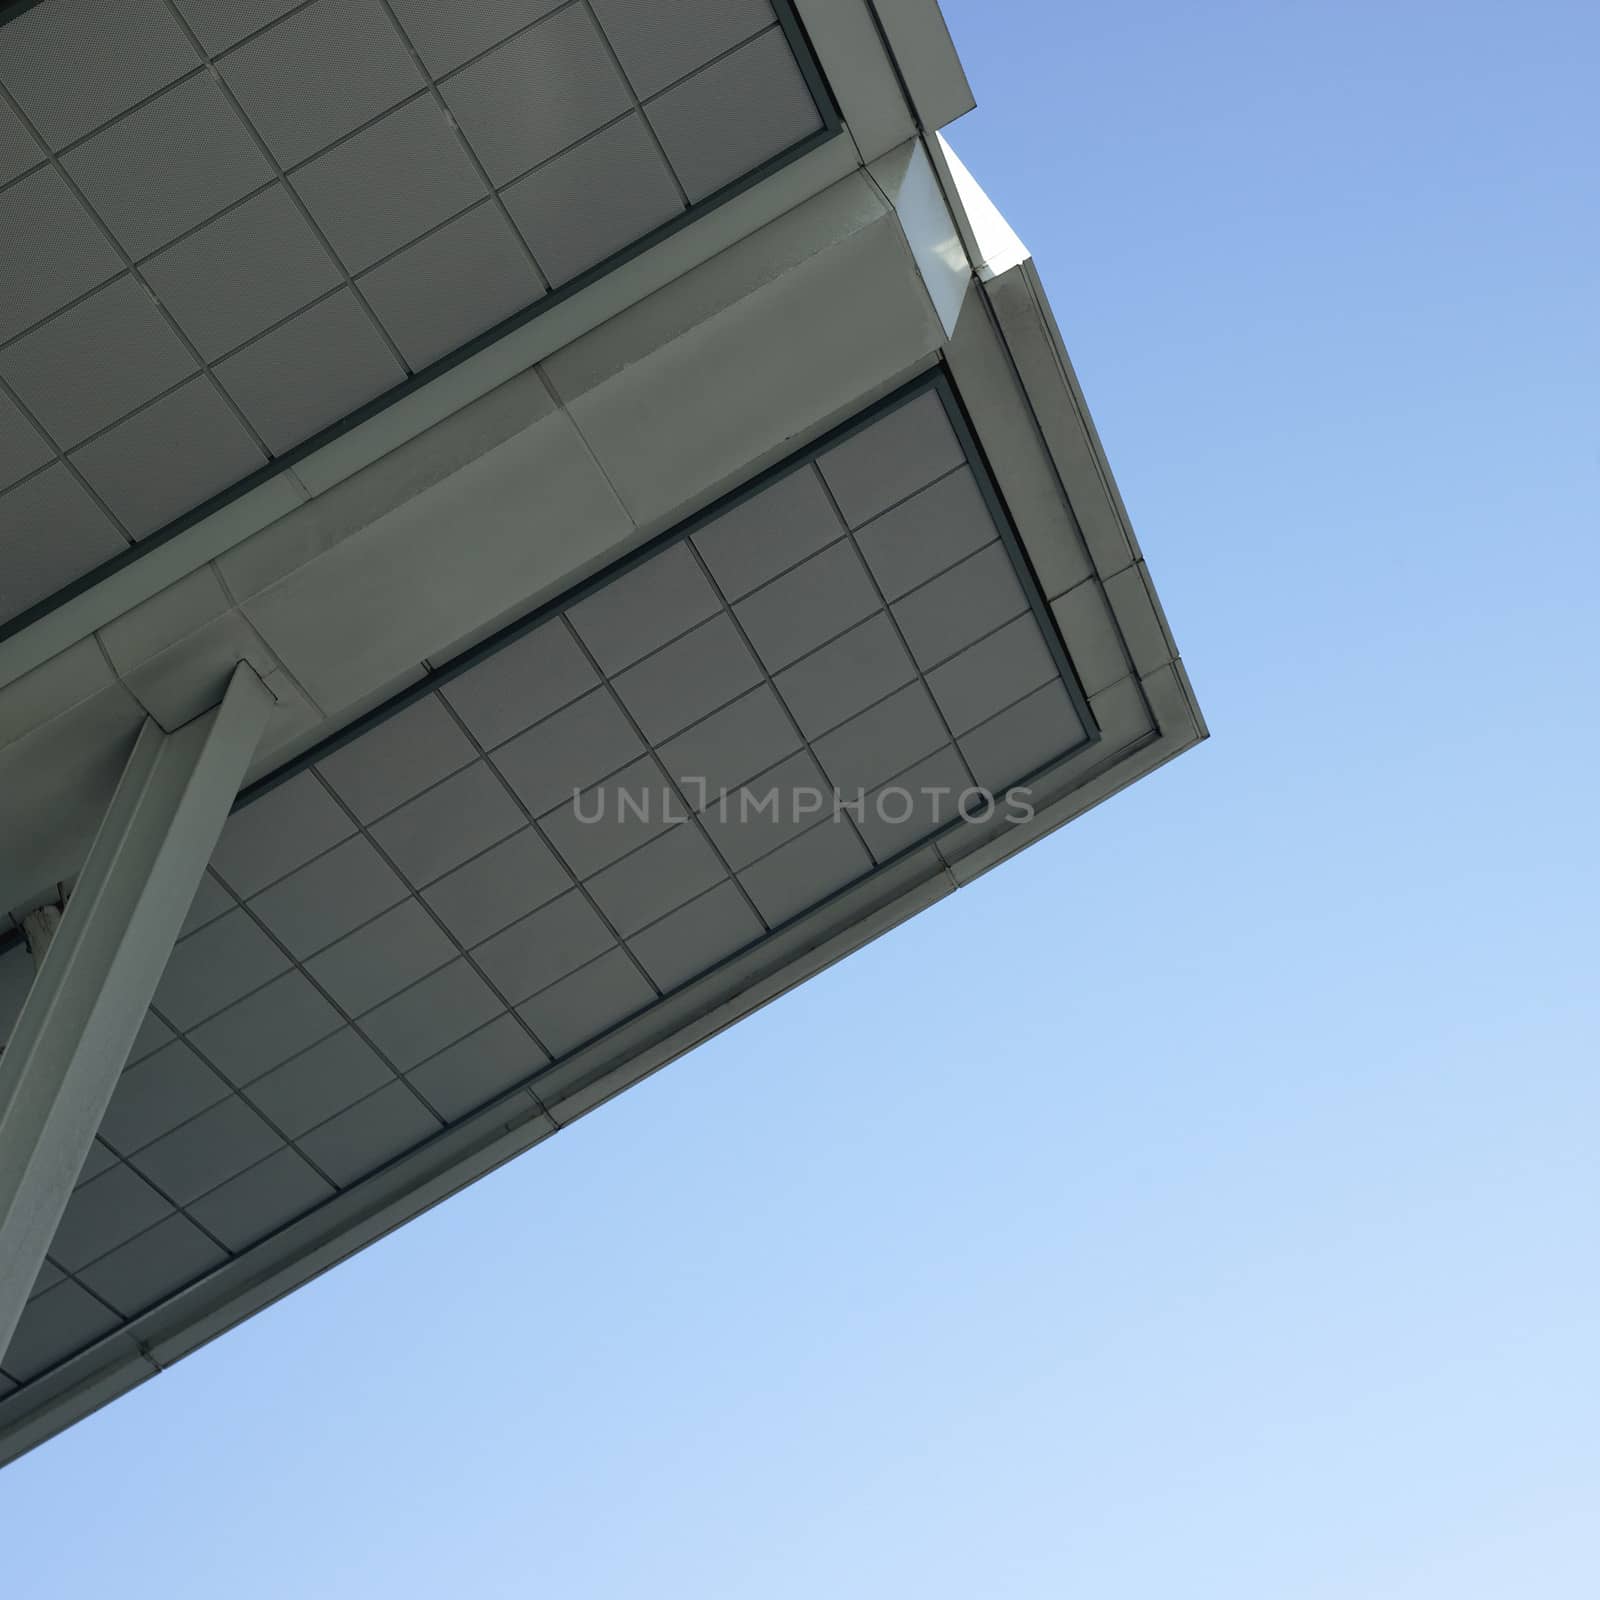 Modern architectural awning by mmm